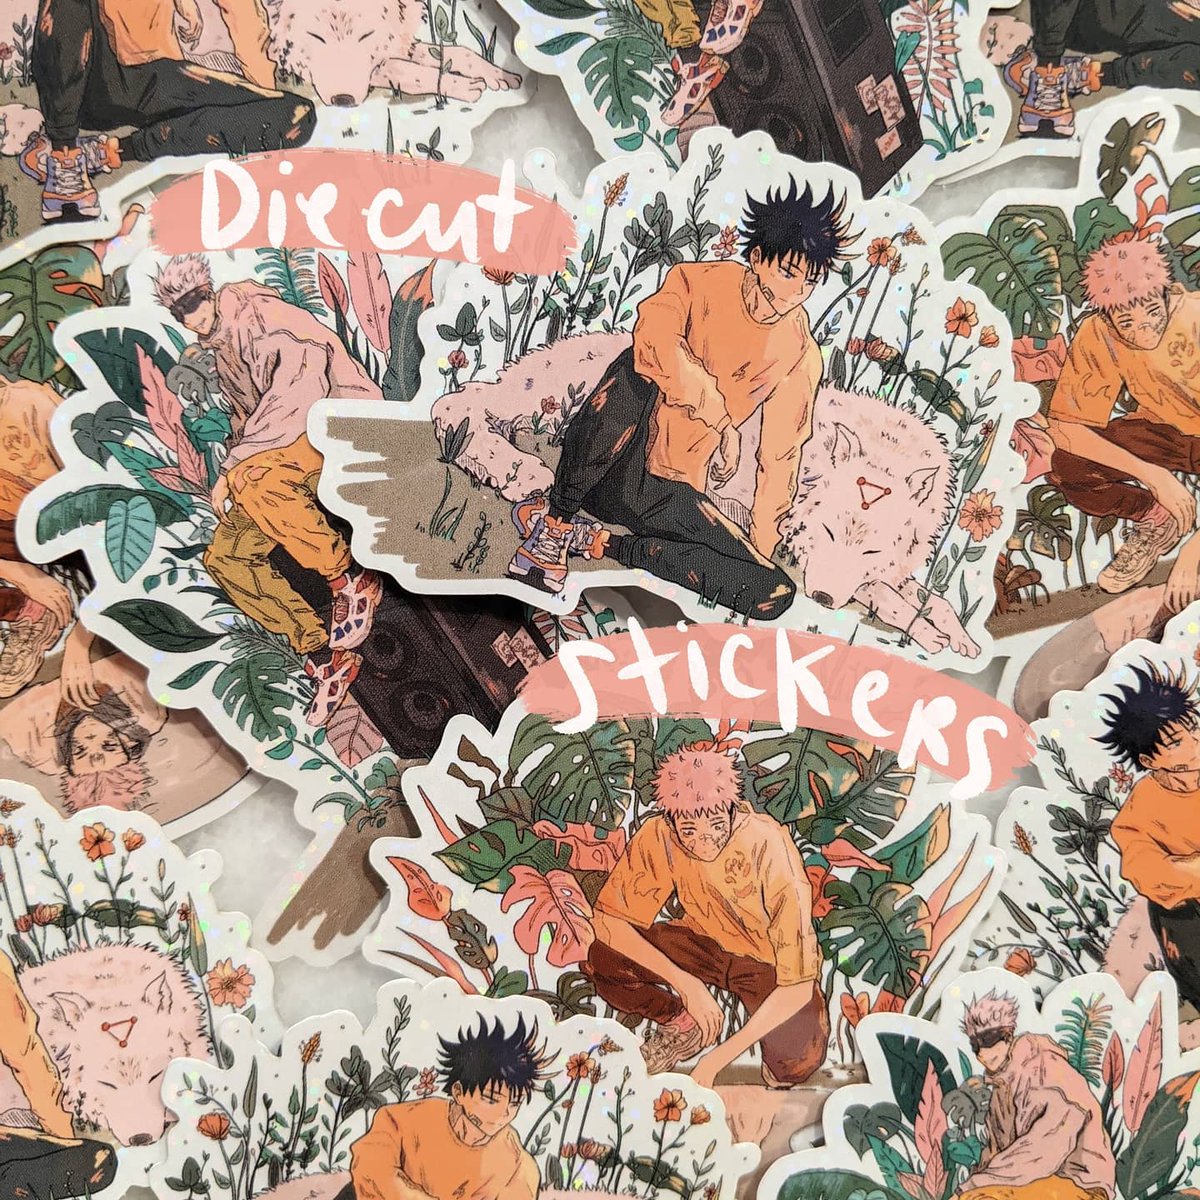 🤍 RT APPRECIATED 🤍 
It's here!! Shop launch next Friday (July 16th) at 12pm PST !! 

🏷️ Shop consists of prints + stickers
🌏  International shipping available
💌 Shipping comes with tracking
🌸 Shop link will be updated in bio
⏳ I'll add a countdown soon! 